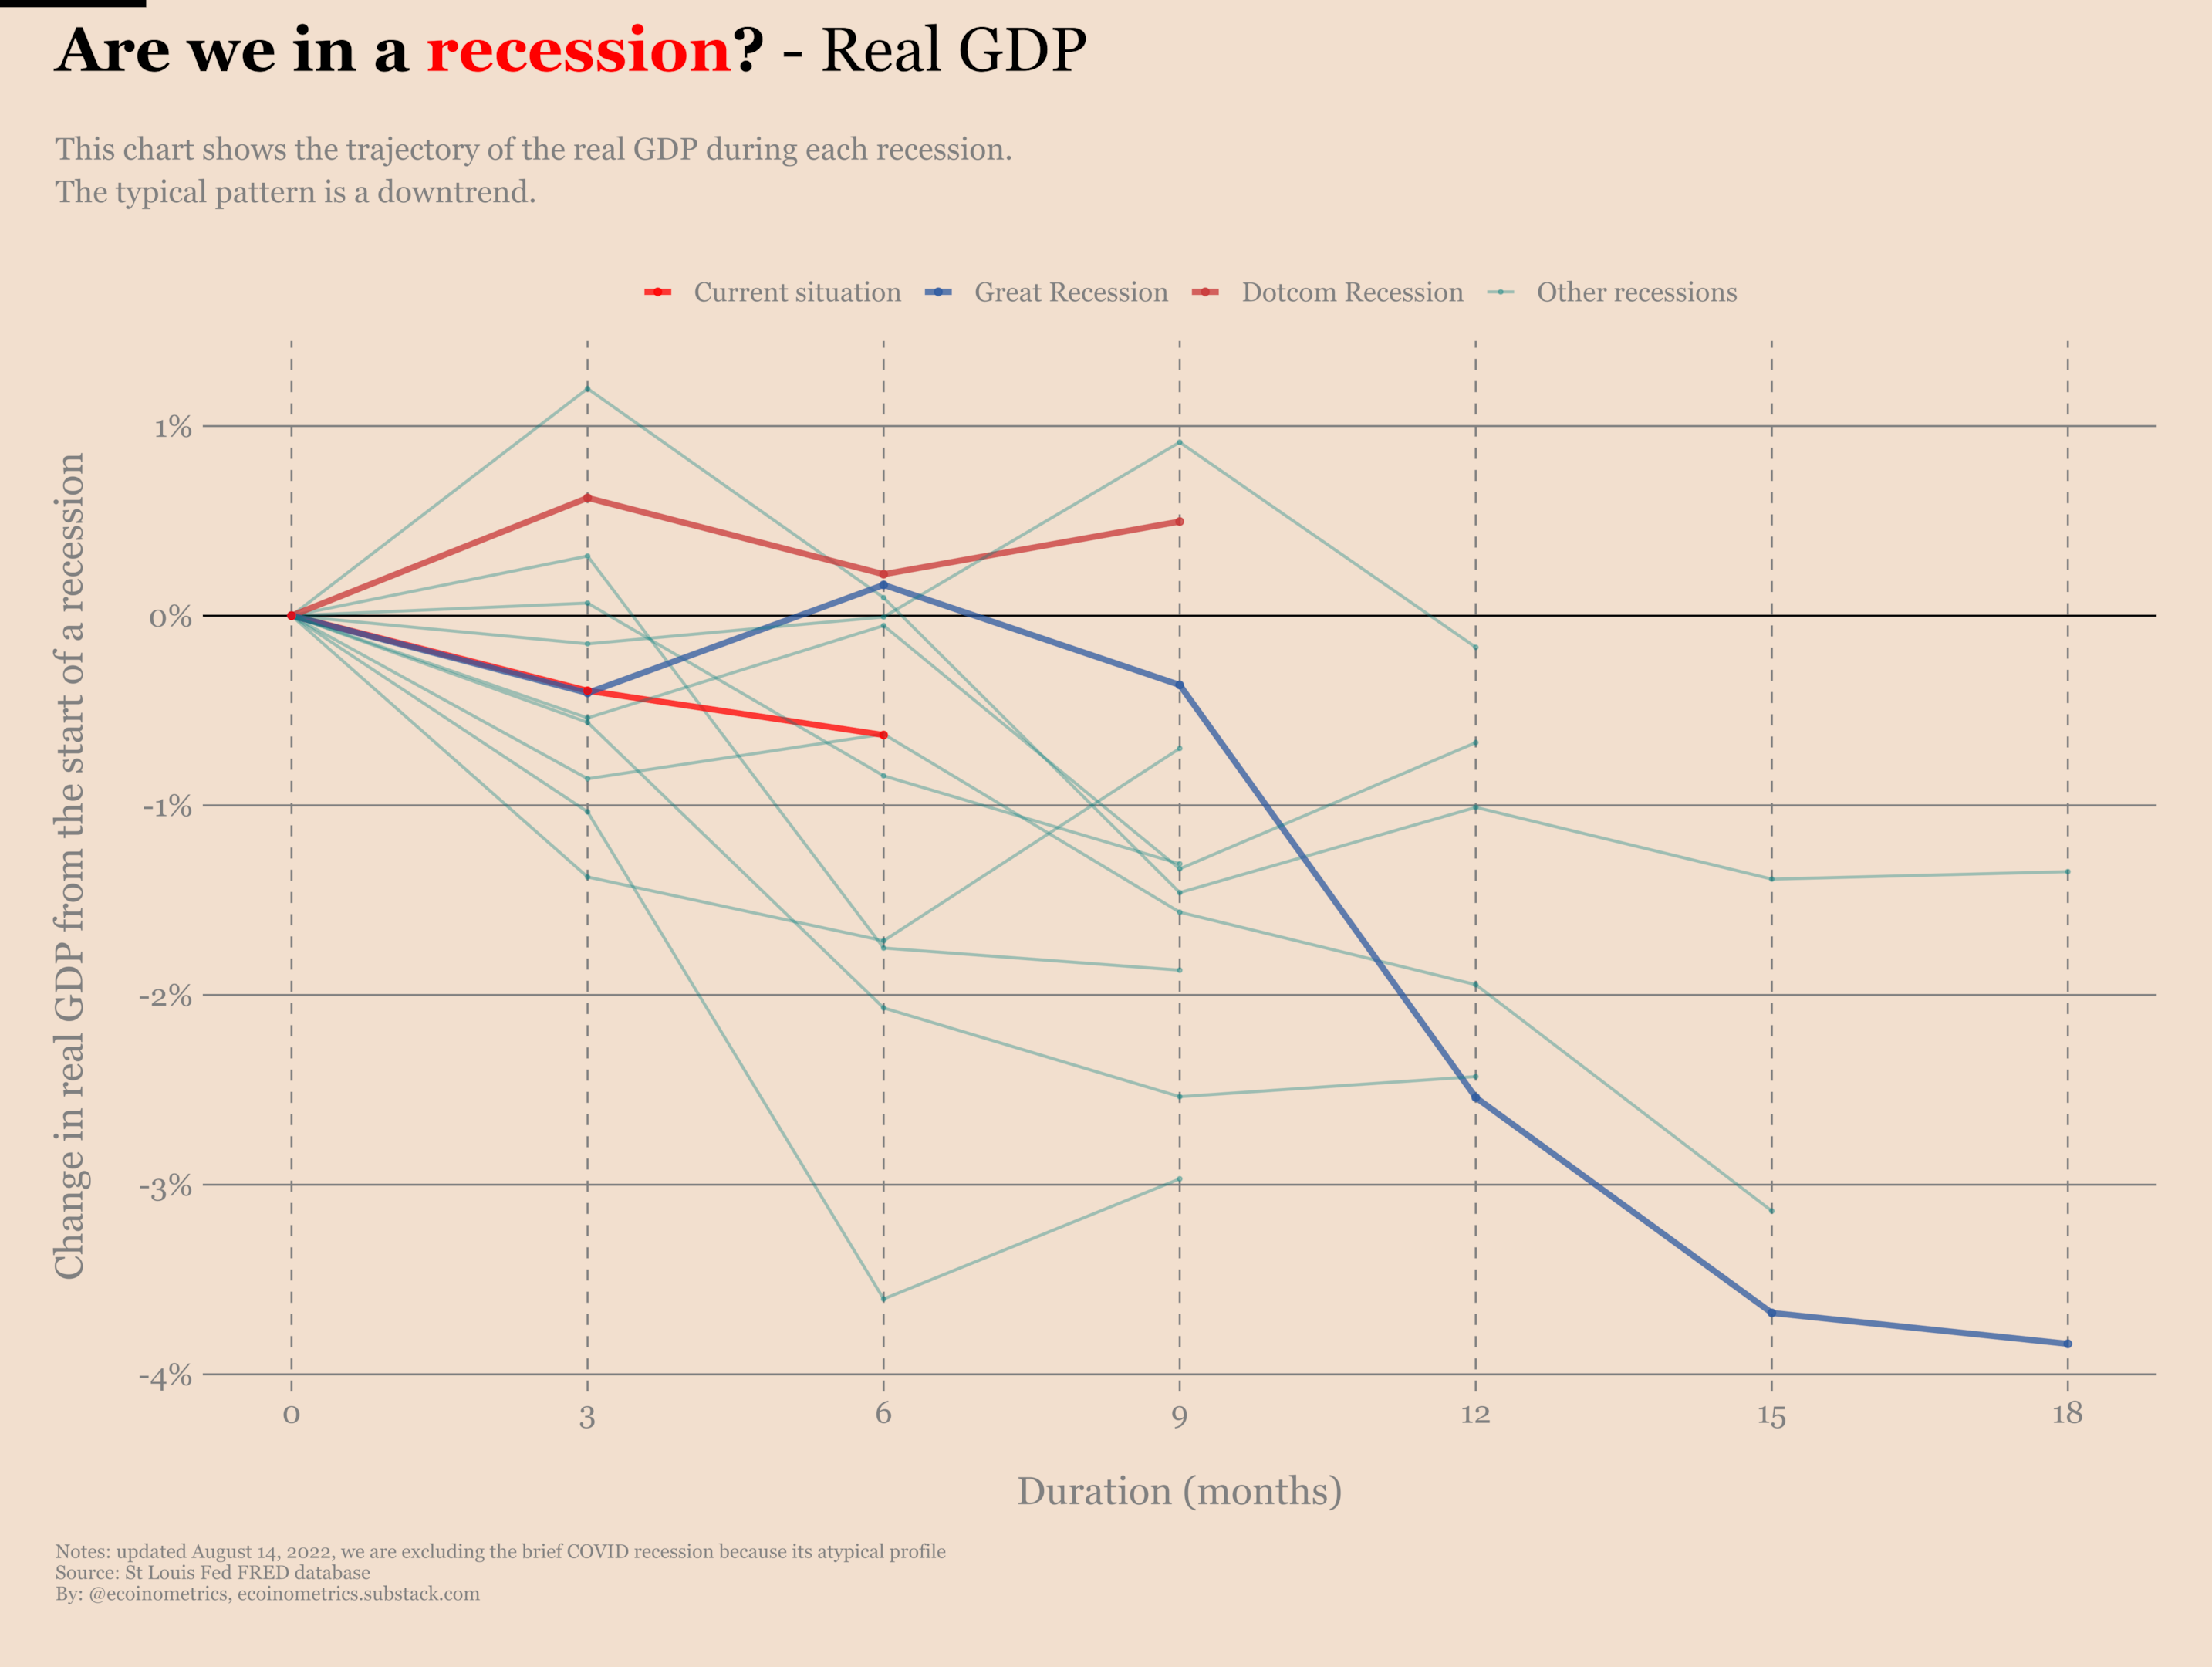 Comparing the evolution of the real GDP to past recessions.